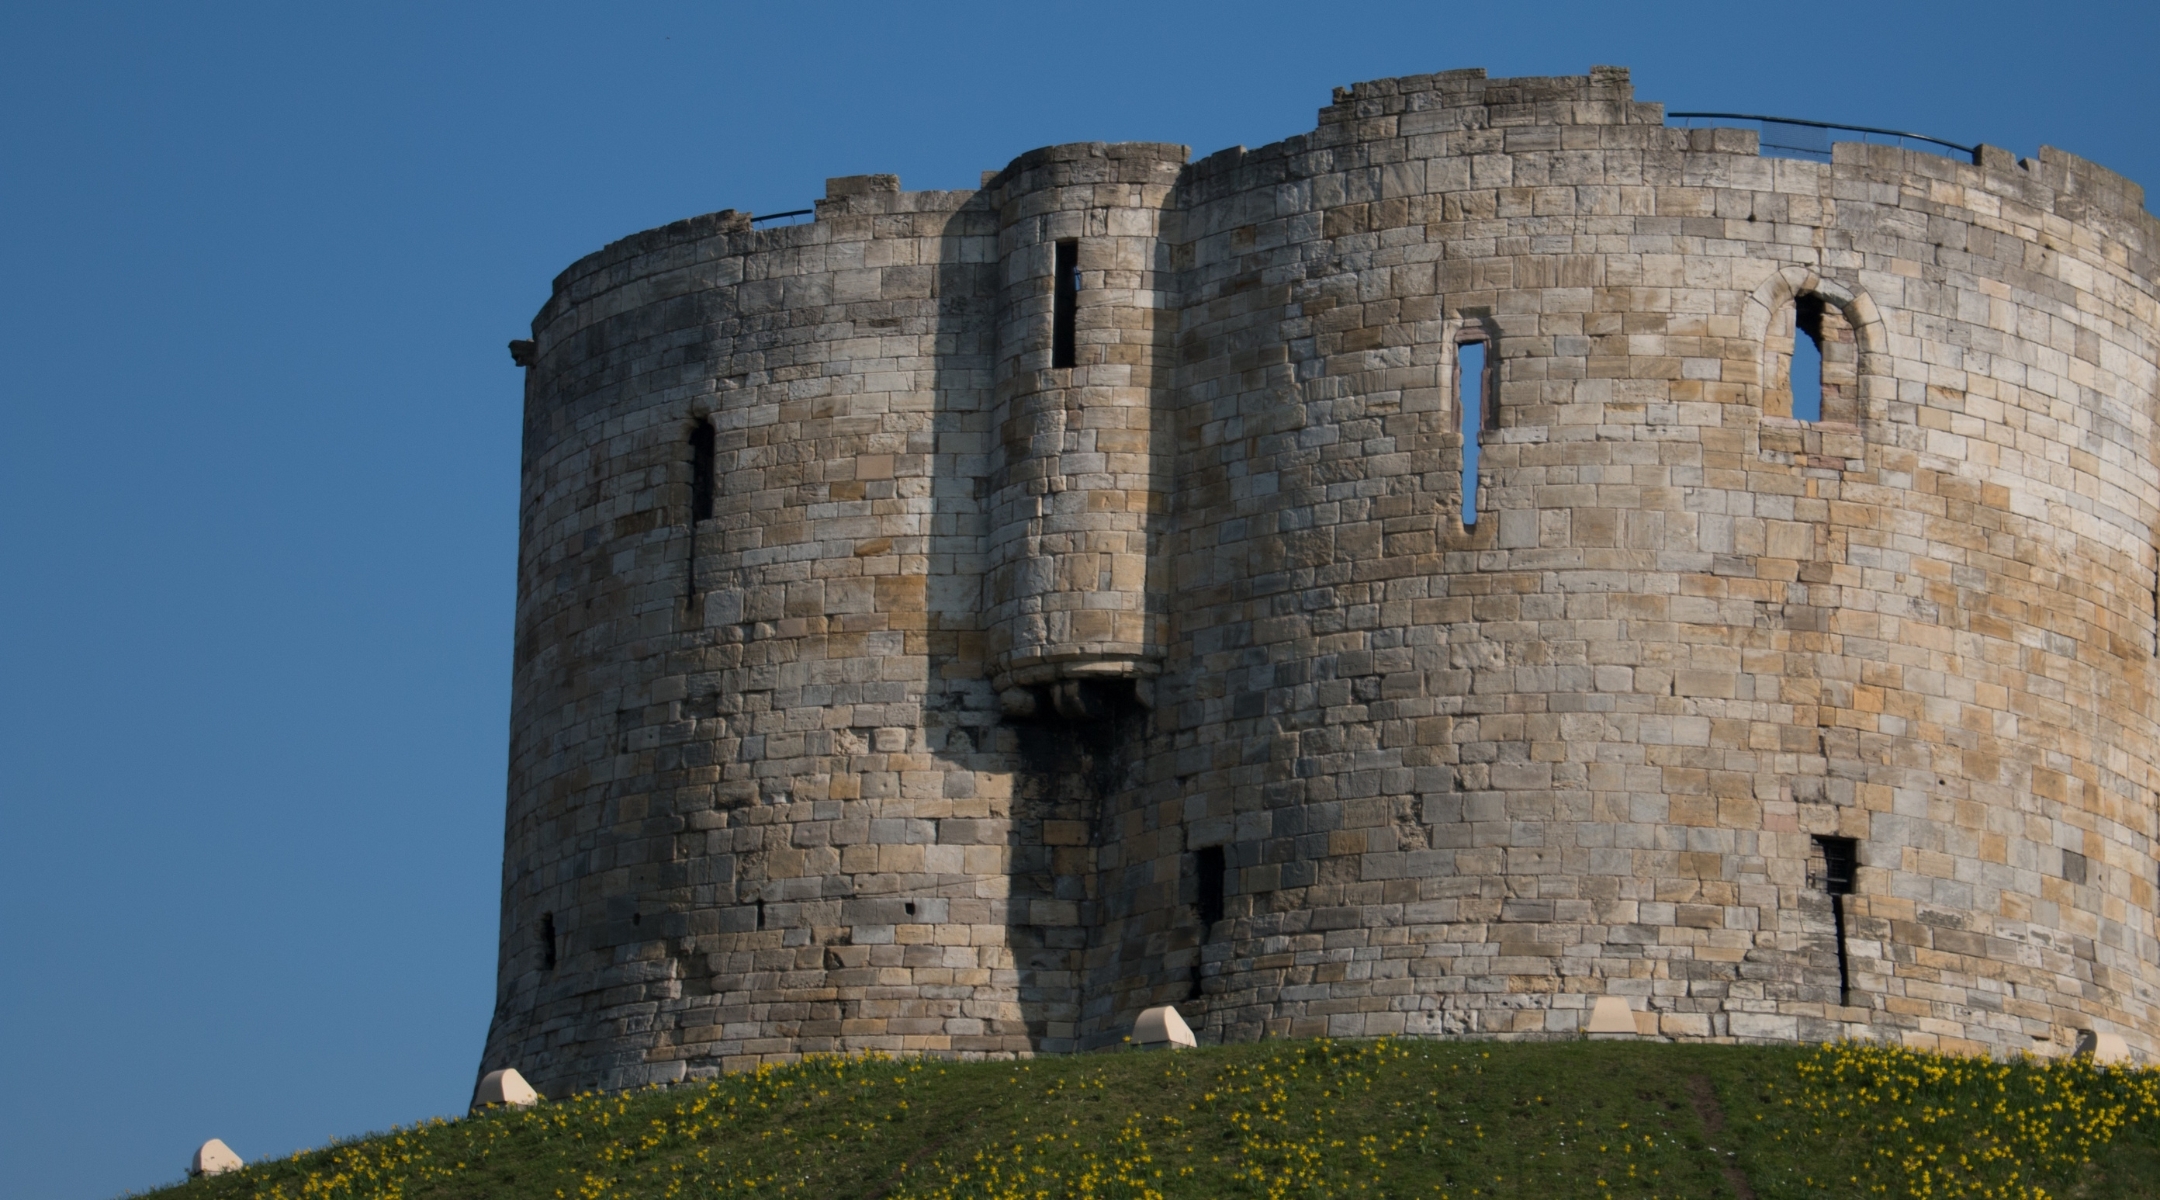 Clifford’s Tower, the site of the massacre of the Jews of York took place in 1190. (Wikimedia Commons)